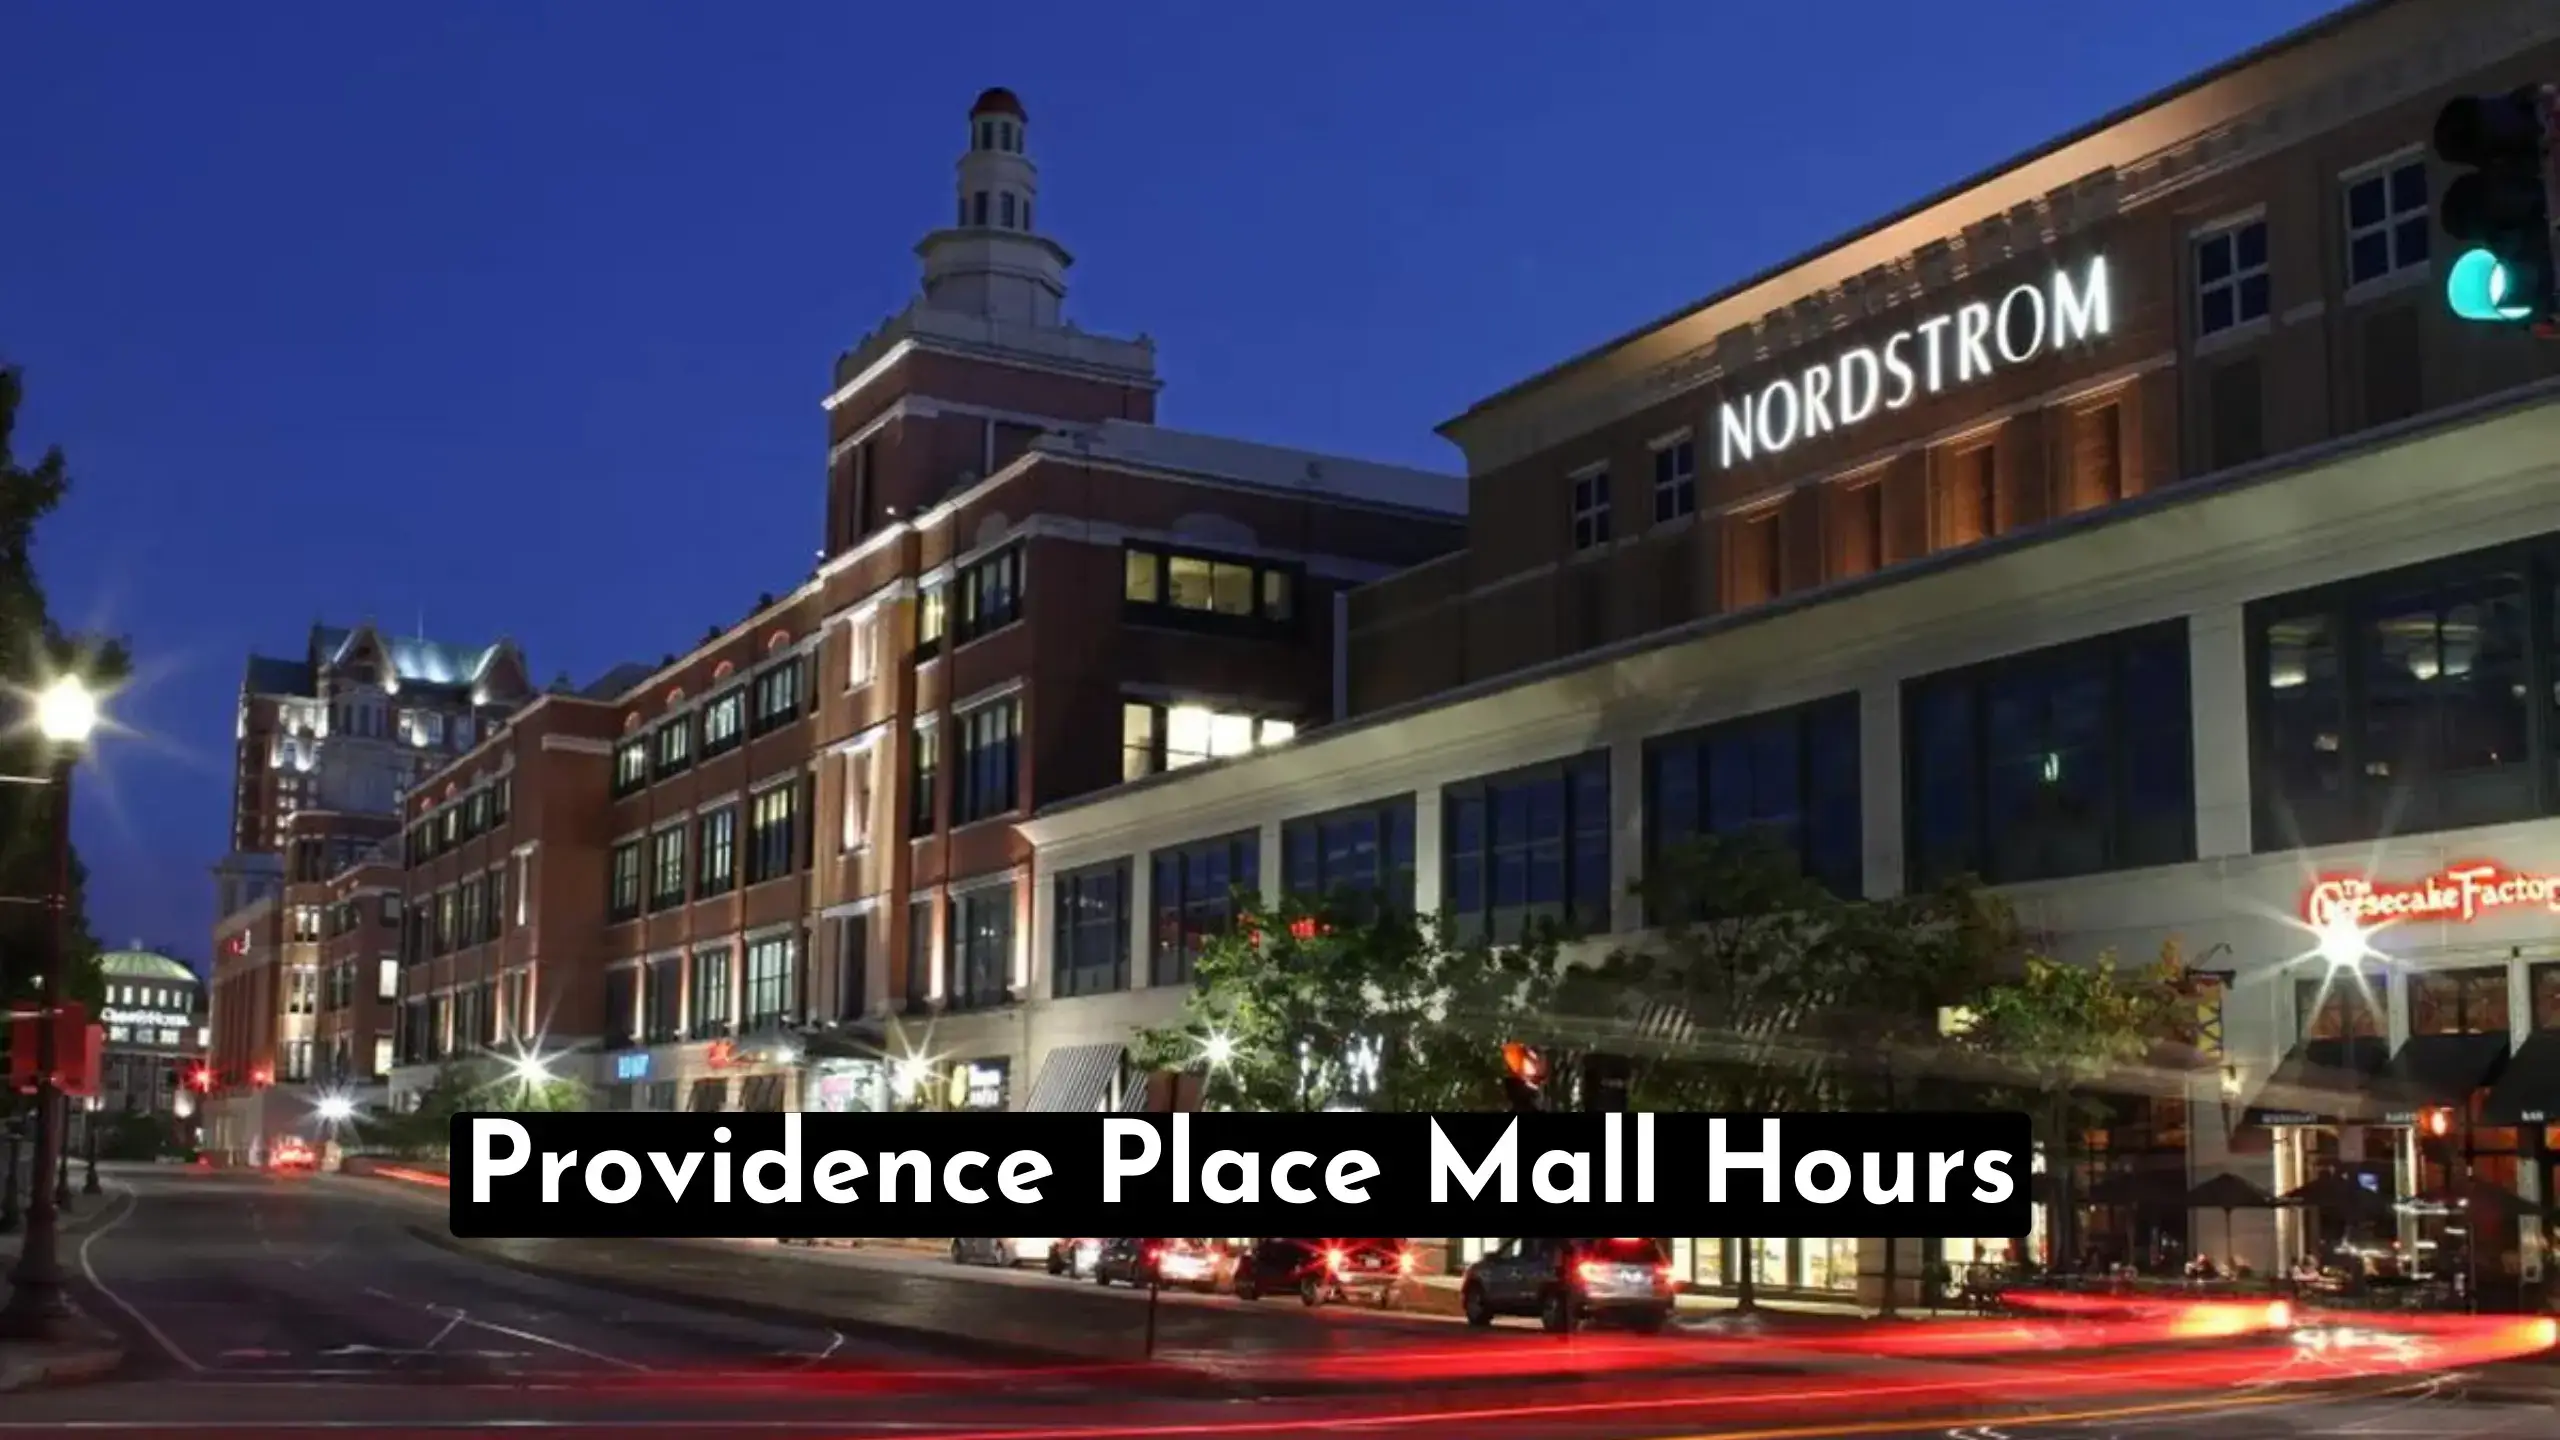 Wondering about the Providence Place Mall Hours?| Here We Will Cover Information about mall's hours of operation, holiday hours, events & more